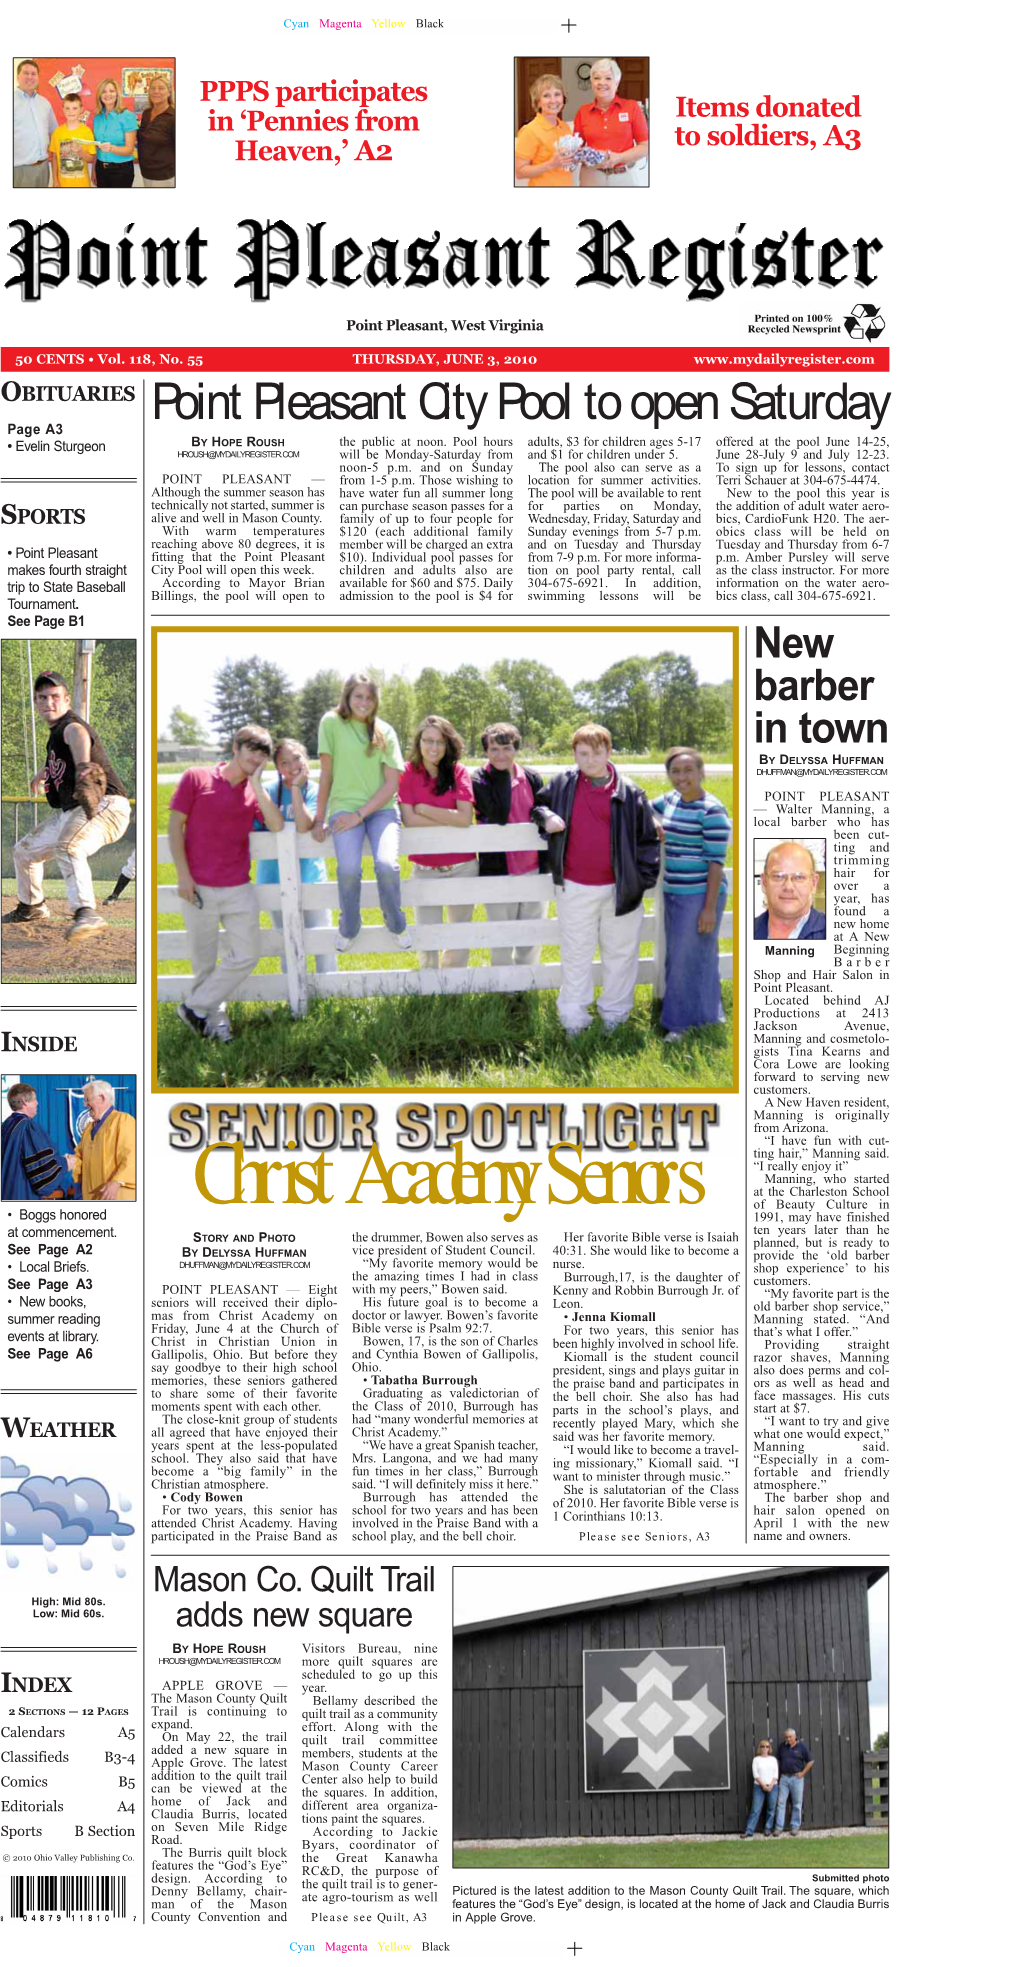 Point Pleasant City Pool to Open Saturday Page A3 • Evelin Sturgeon by HOPE ROUSH the Public at Noon